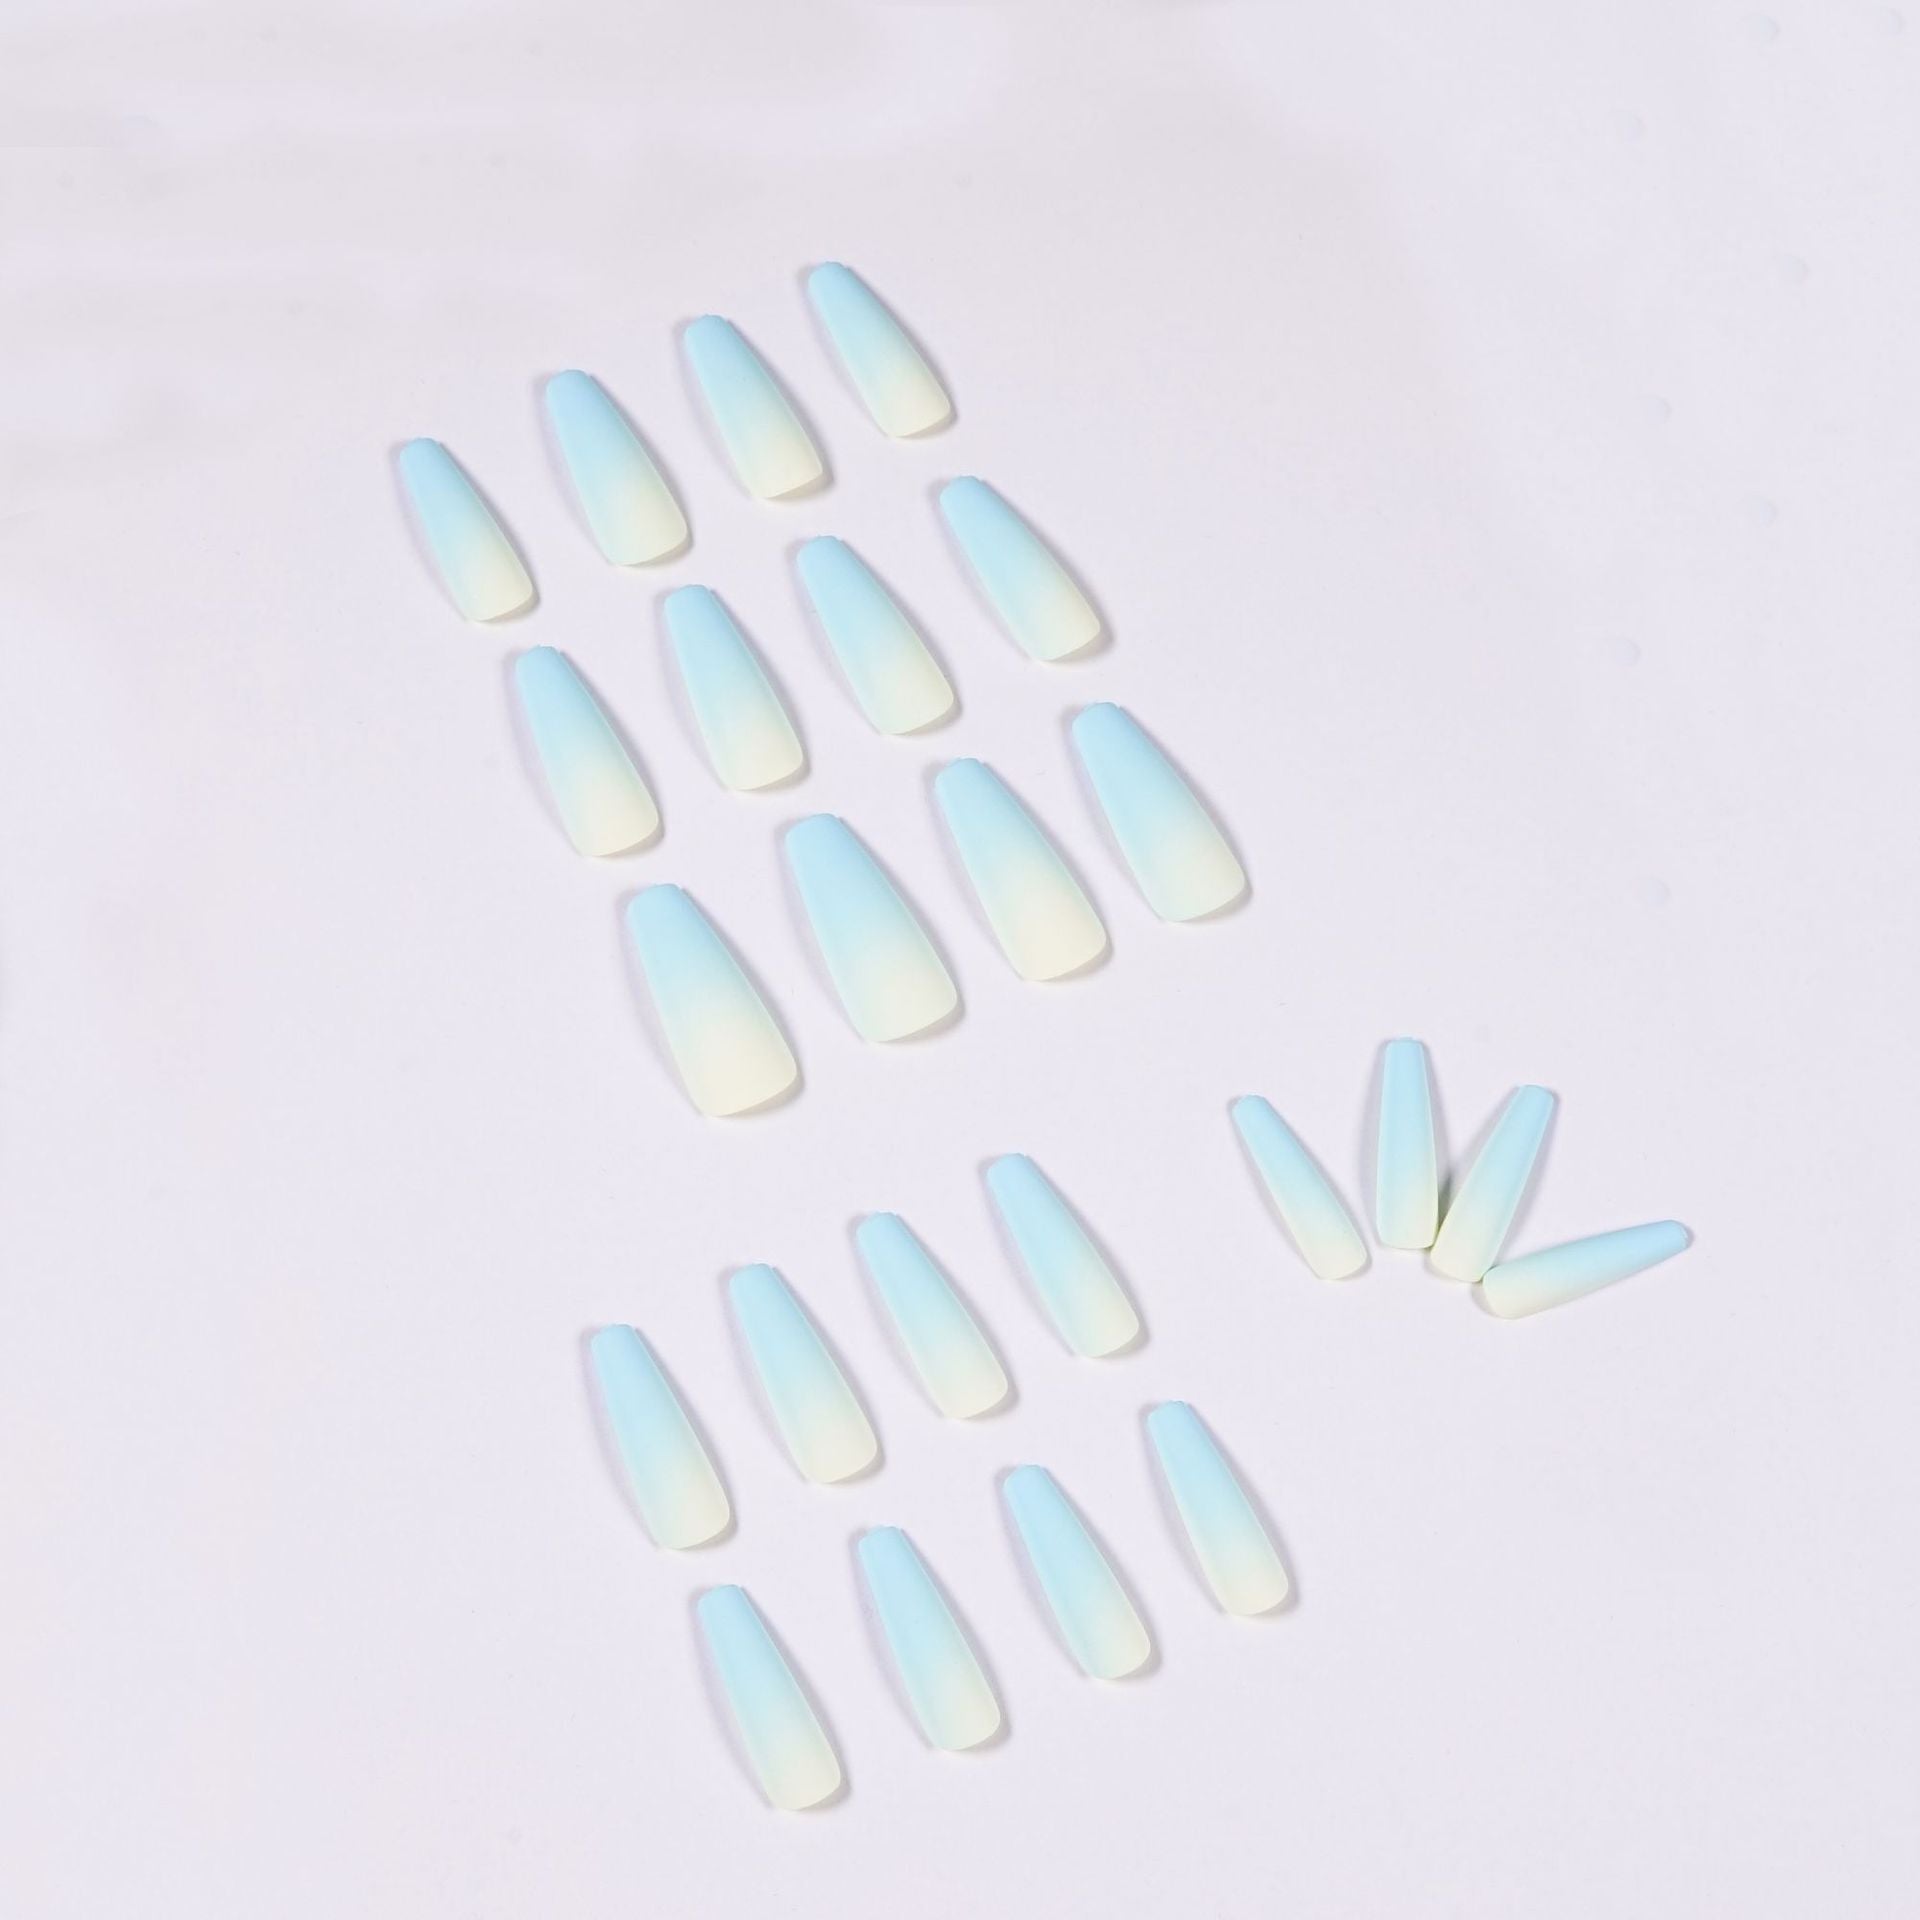 blue ombre nails 70305300-1 lying on white background